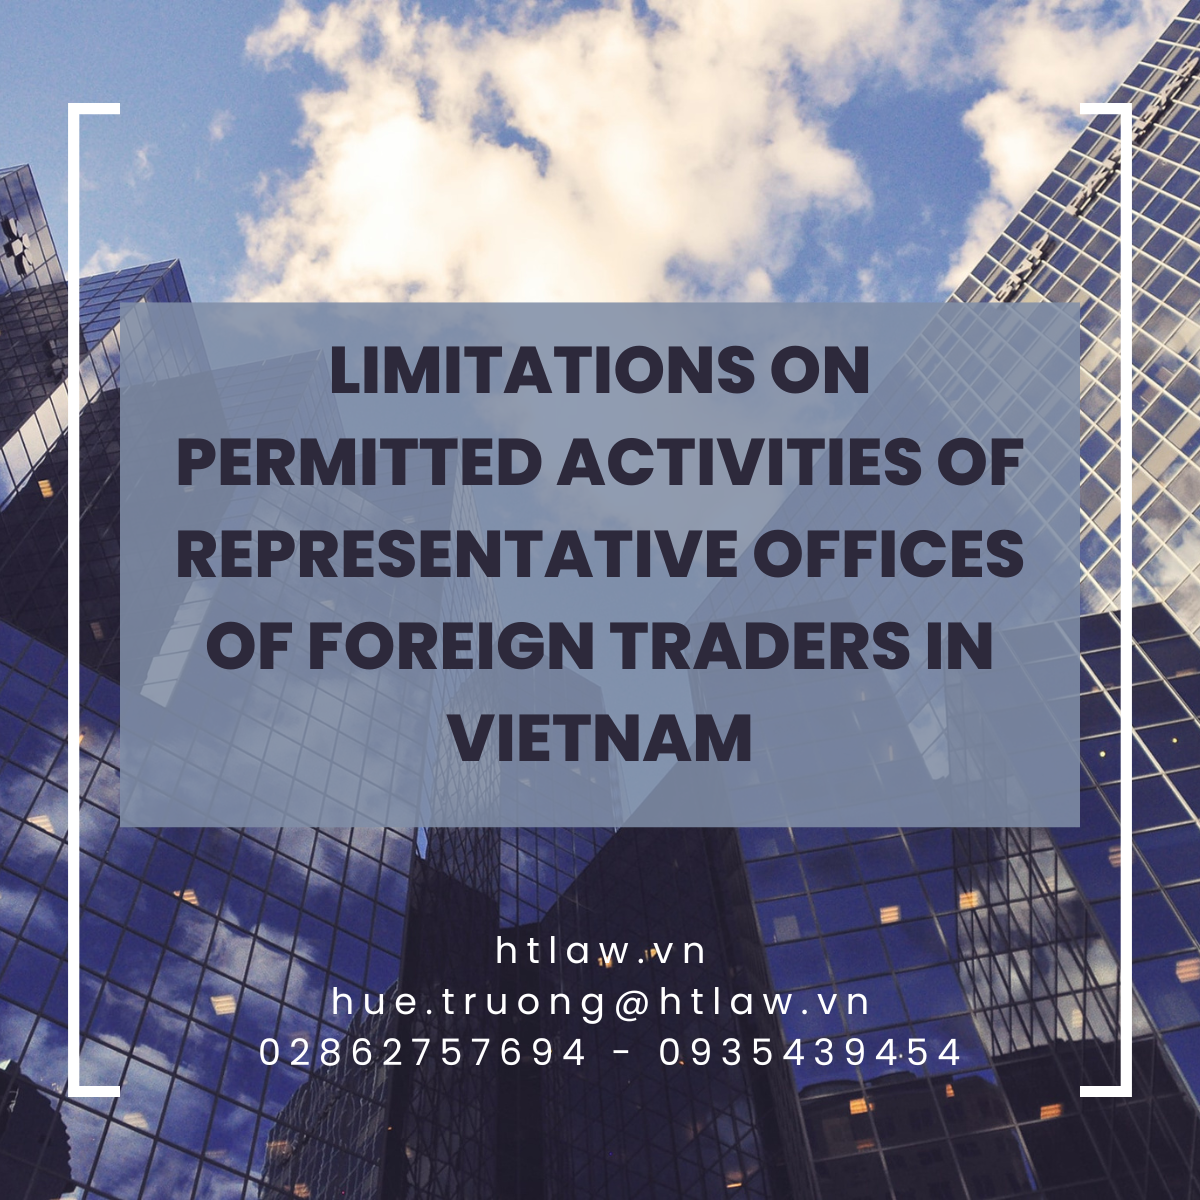 Limitations on permitted activities of representative offices of foreign traders in Vietnam